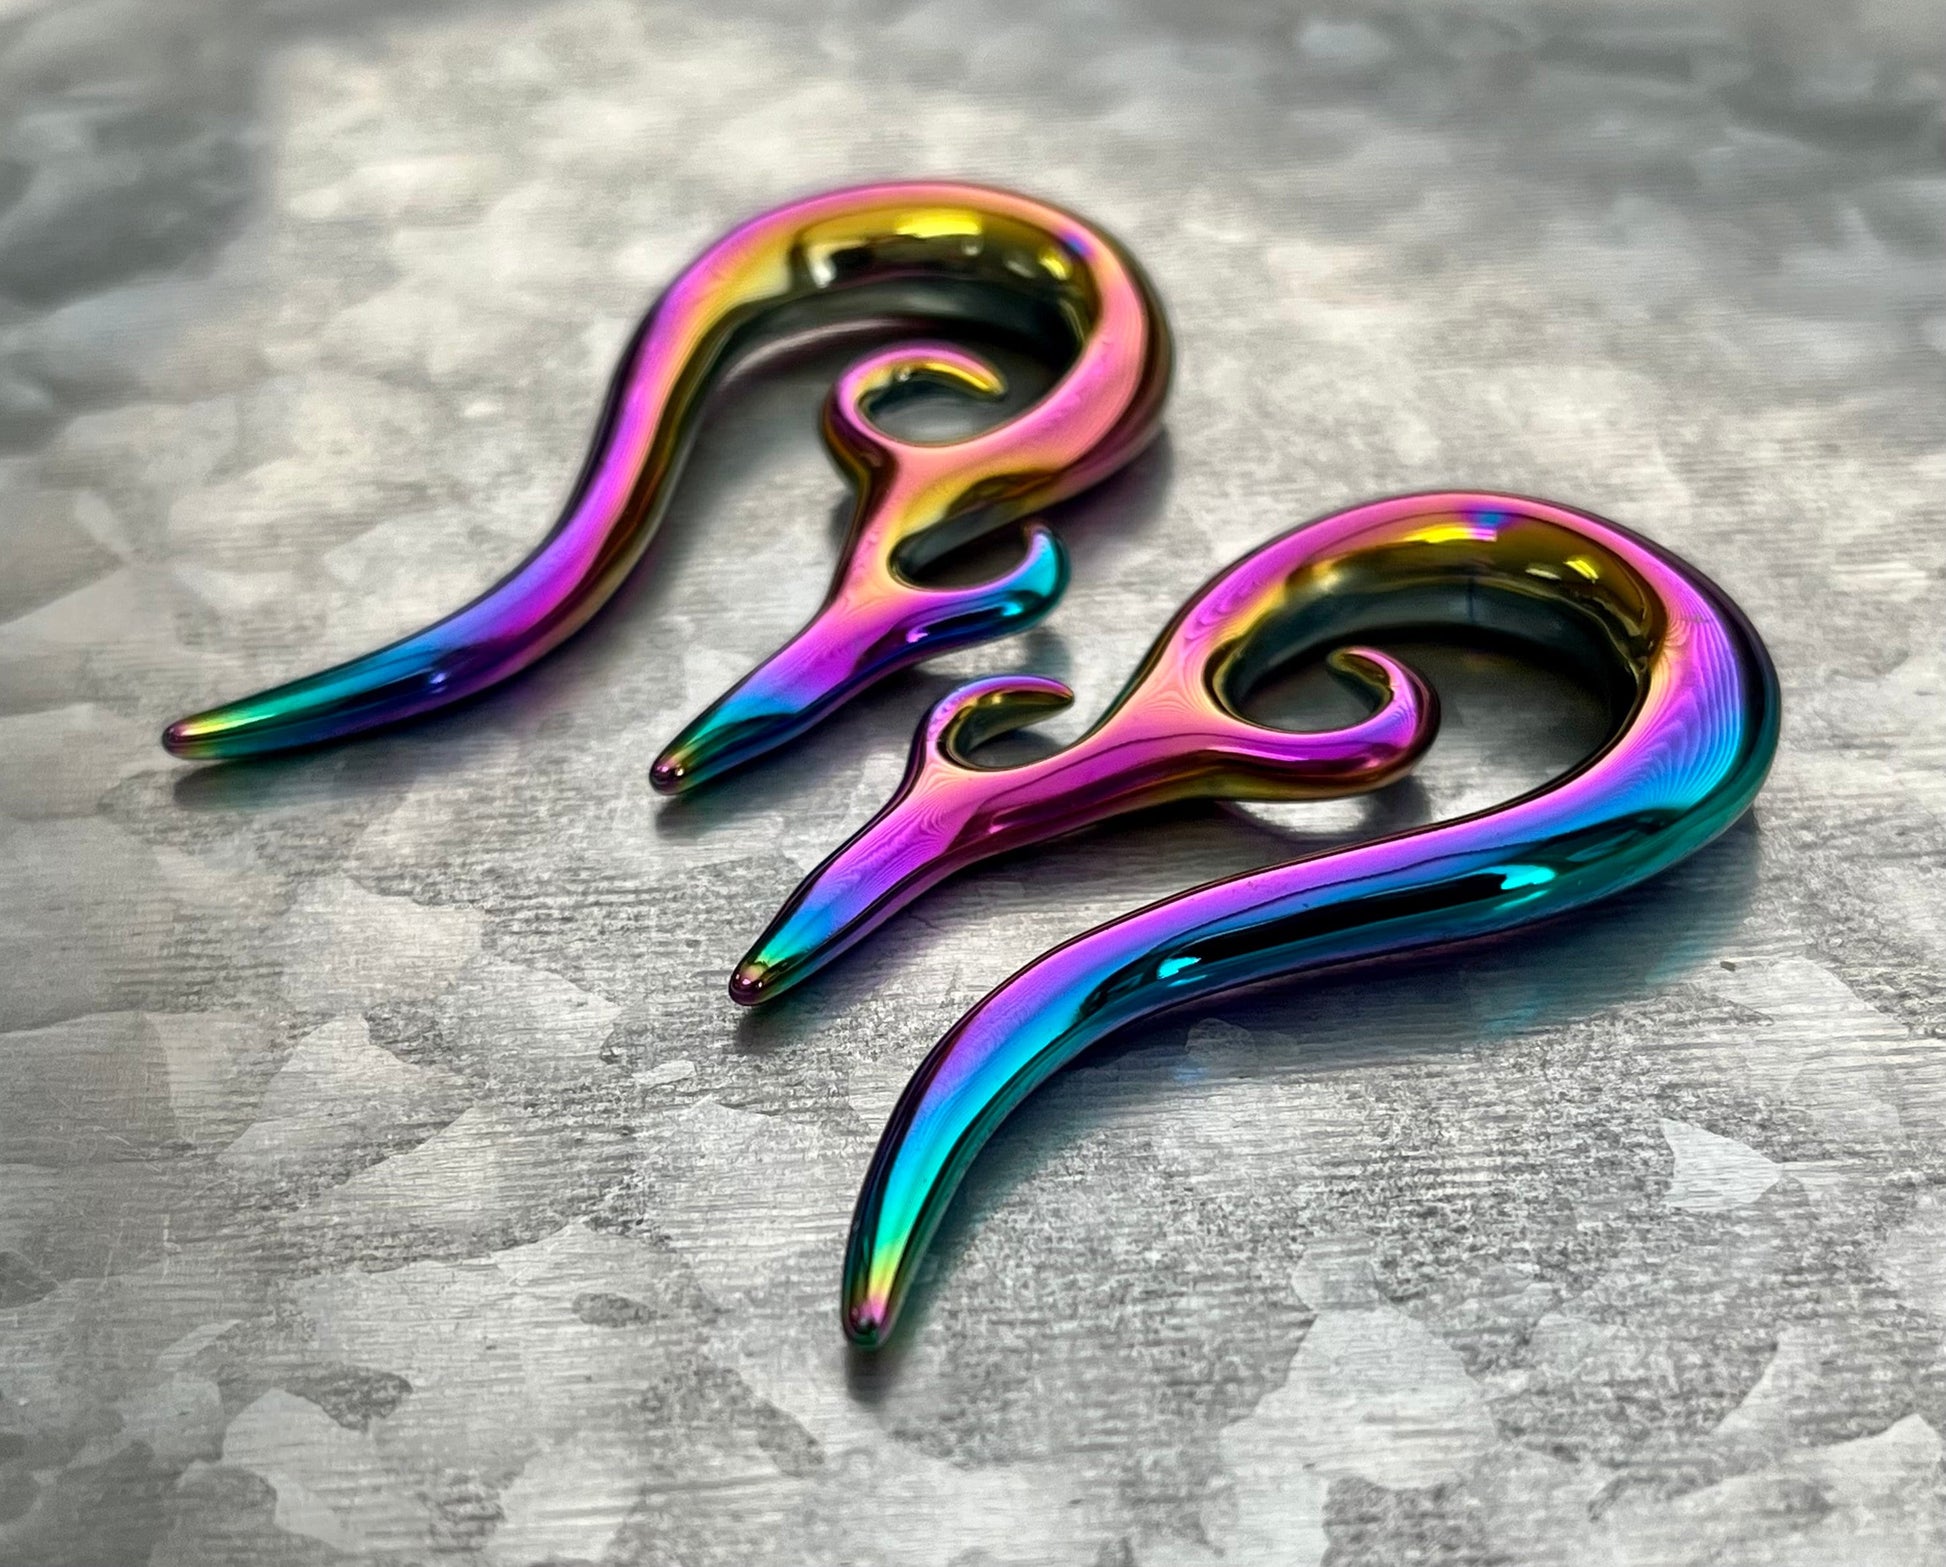 PAIR of Unusual Rainbow Tribal 316L Surgical Steel Hanging Tapers Expanders - Gauges 12g (2mm) thru 0g (8mm) Available!